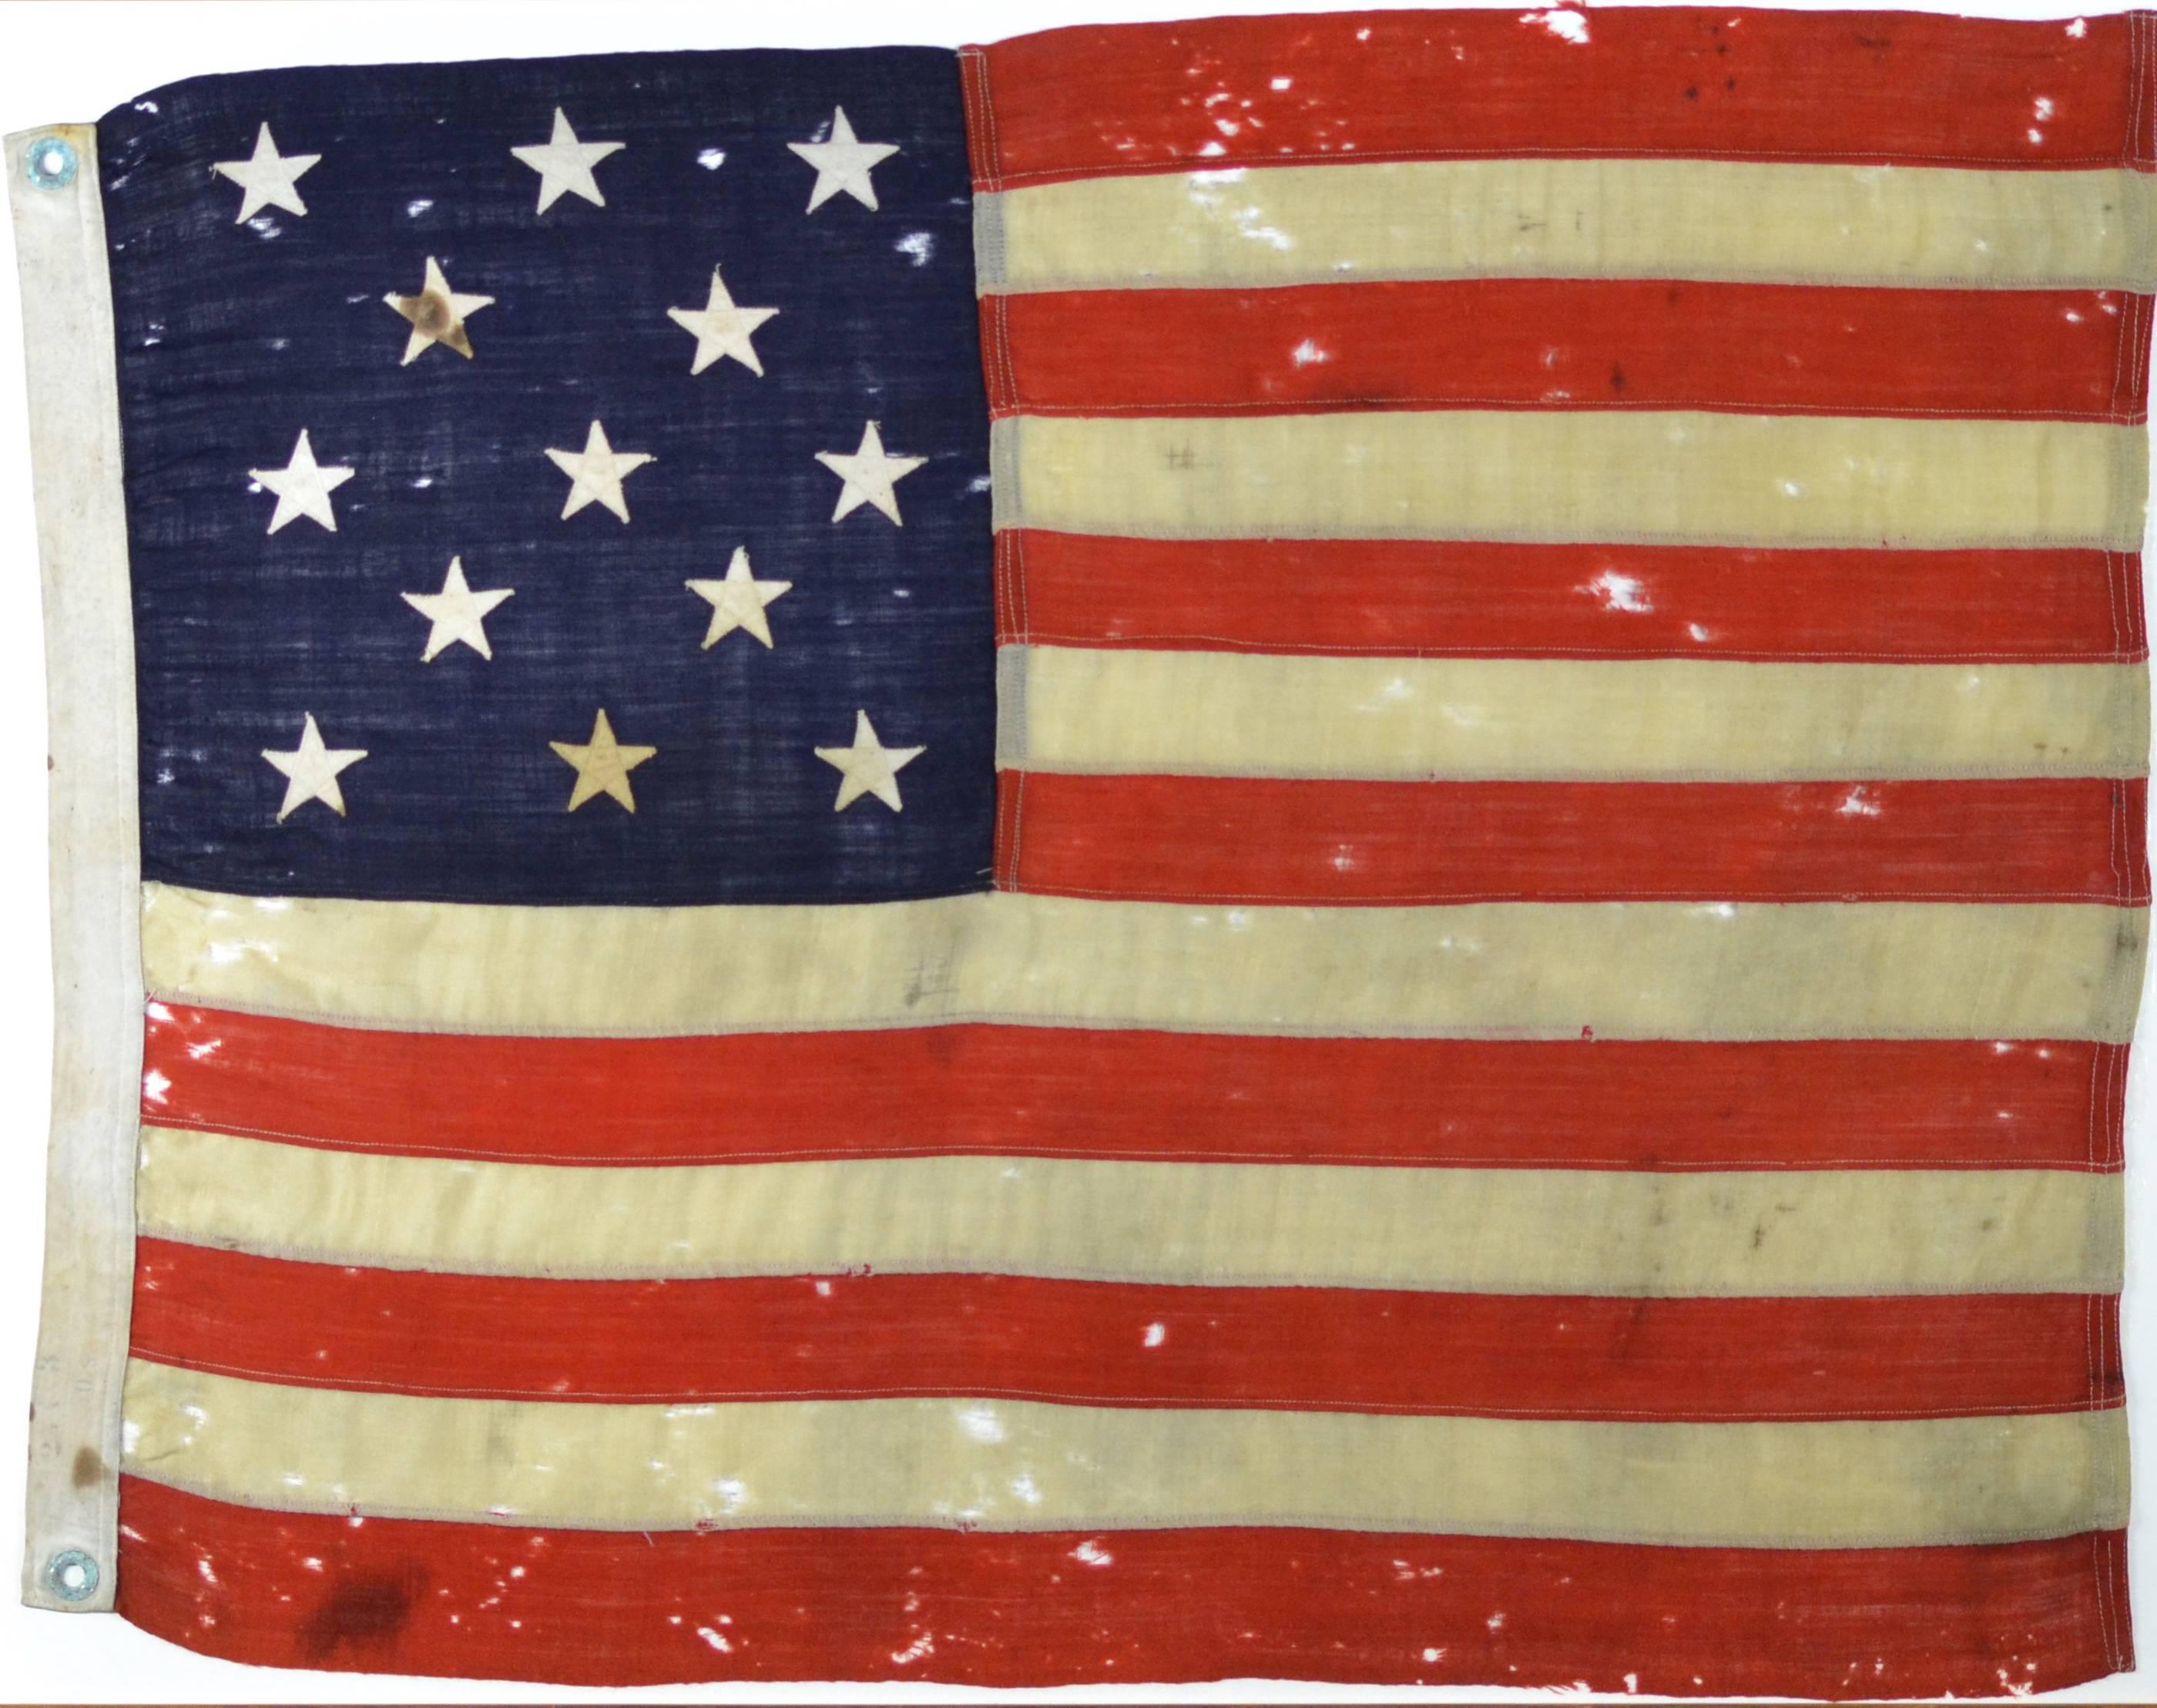 Beautiful antique 13 star American flag made of wool. The perfect size for almost any room. Single line hand or foot pump treadle sewing. Individual hand-cut and sewn stripes. Hand pressed brass grommets on a canvas hoist. Fly end is triple treadle